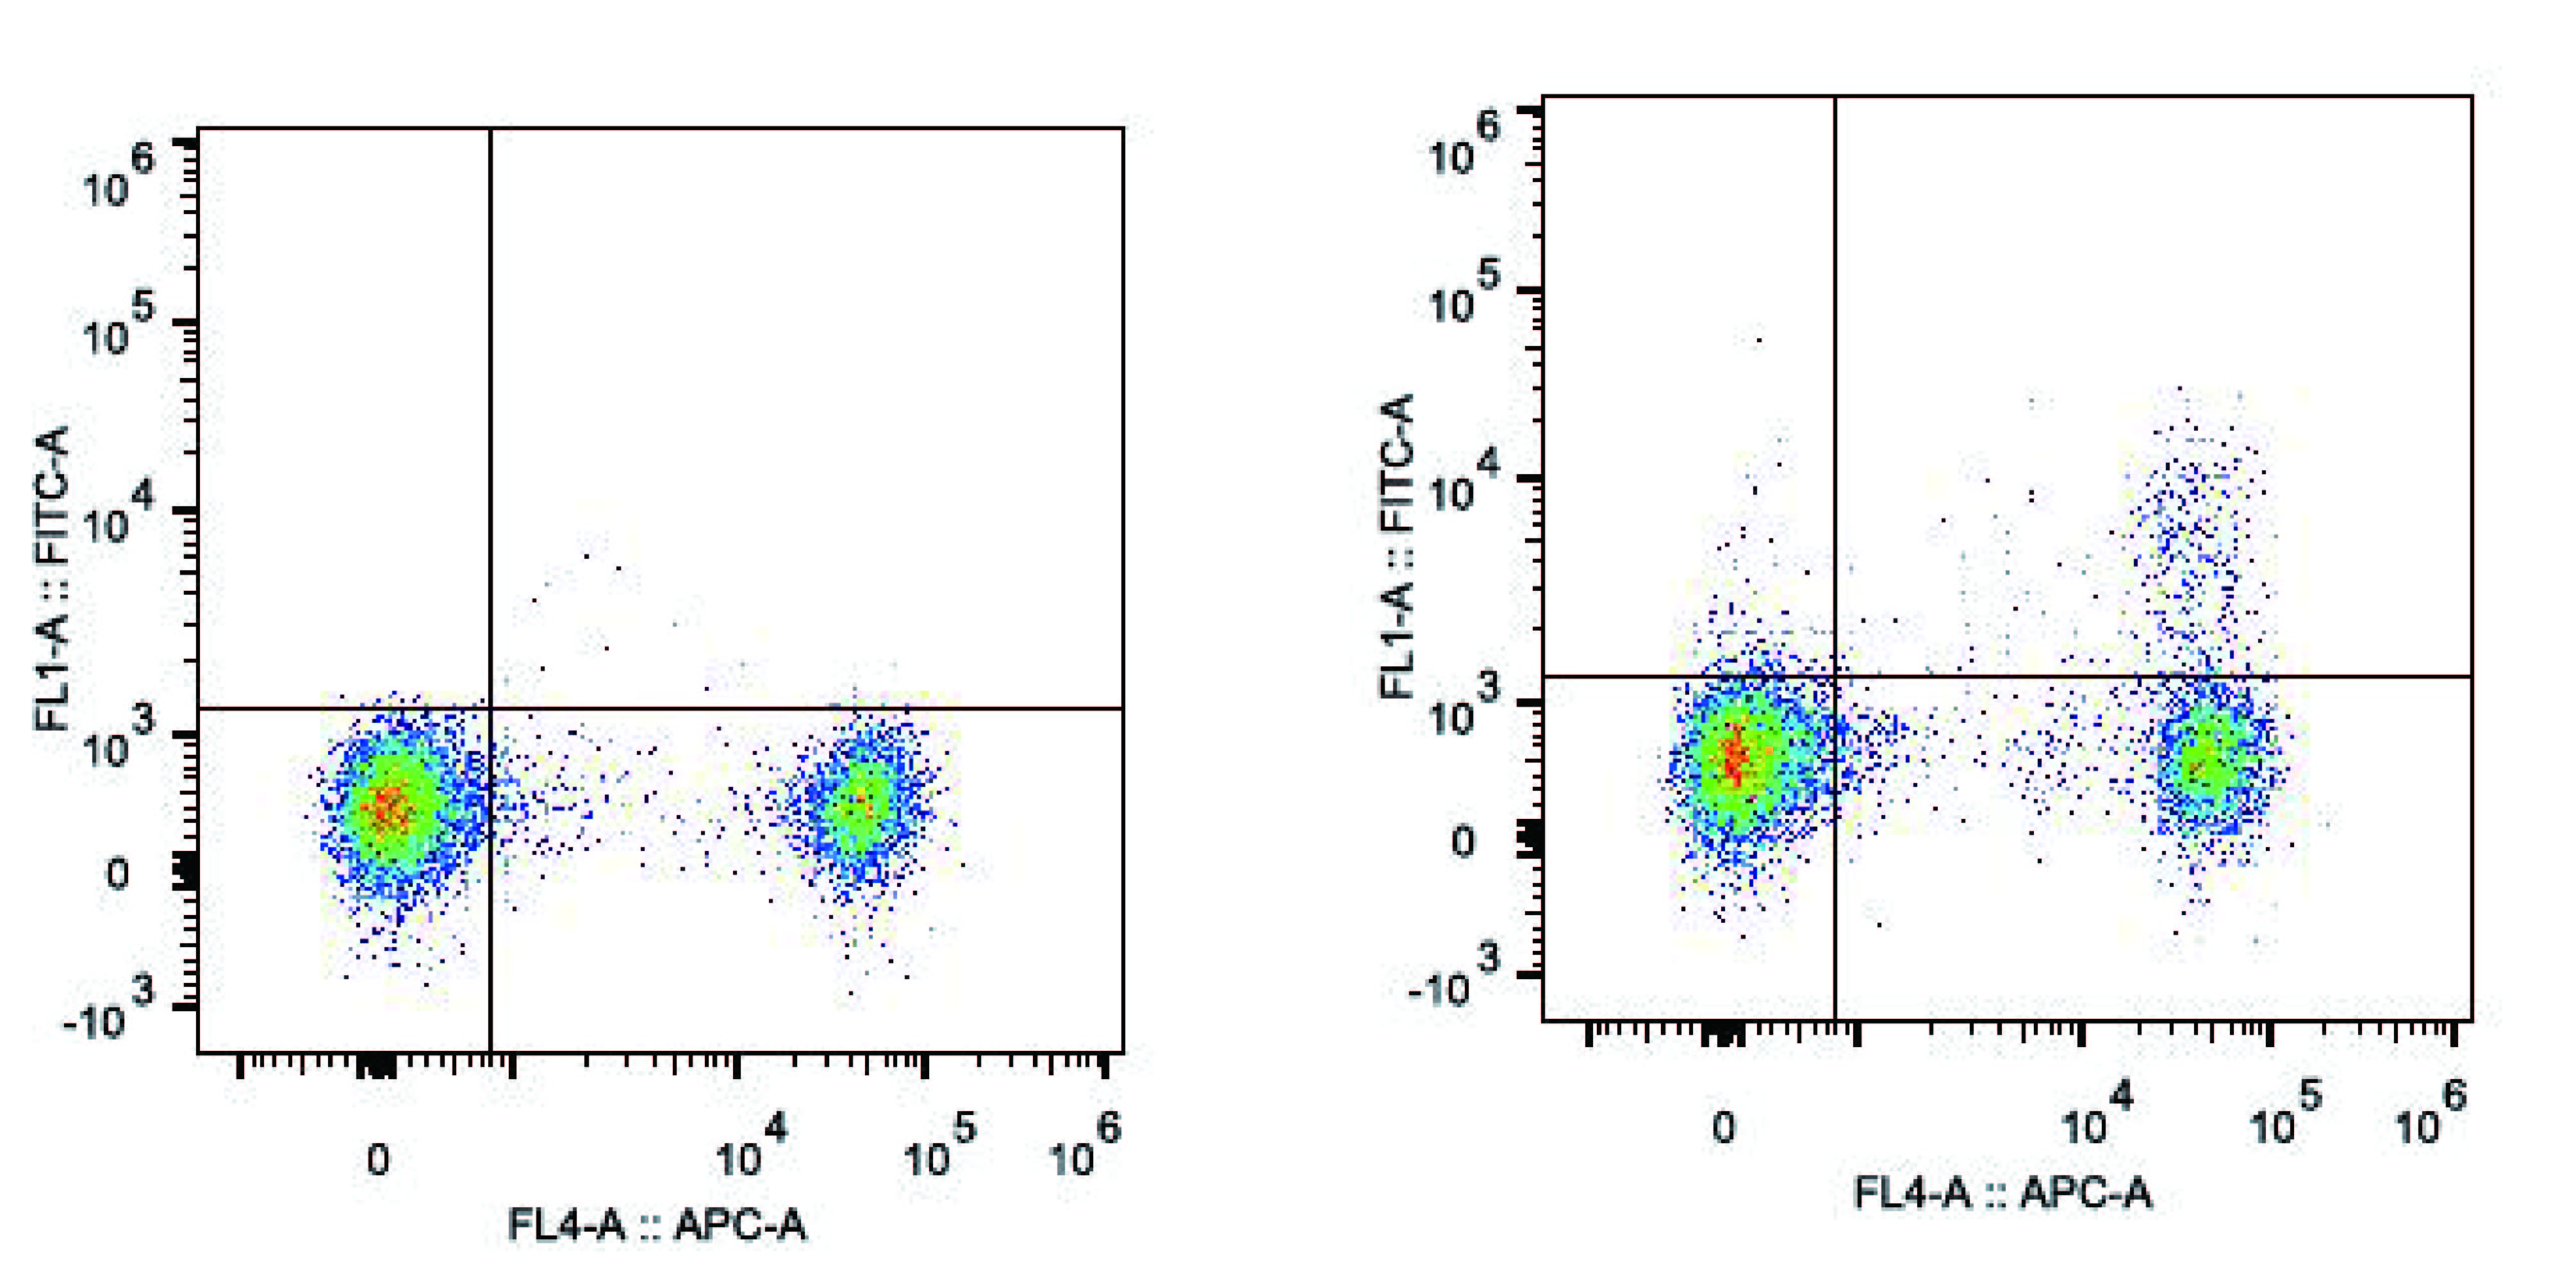 C57BL/6 murine splenocytes are stained with Anti-Mouse CD25 Monoclonal Antibody(AF488 Conjugated)[Used at 0.2 μg/10<sup>6</sup> cells dilution]and Anti-Mouse CD4 Monoclonal Antibody(APC Conjugated)(right)). Splenocytes stained with Anti-Mouse CD4 Monoclonal Antibody(APC Conjugated).are used as control.